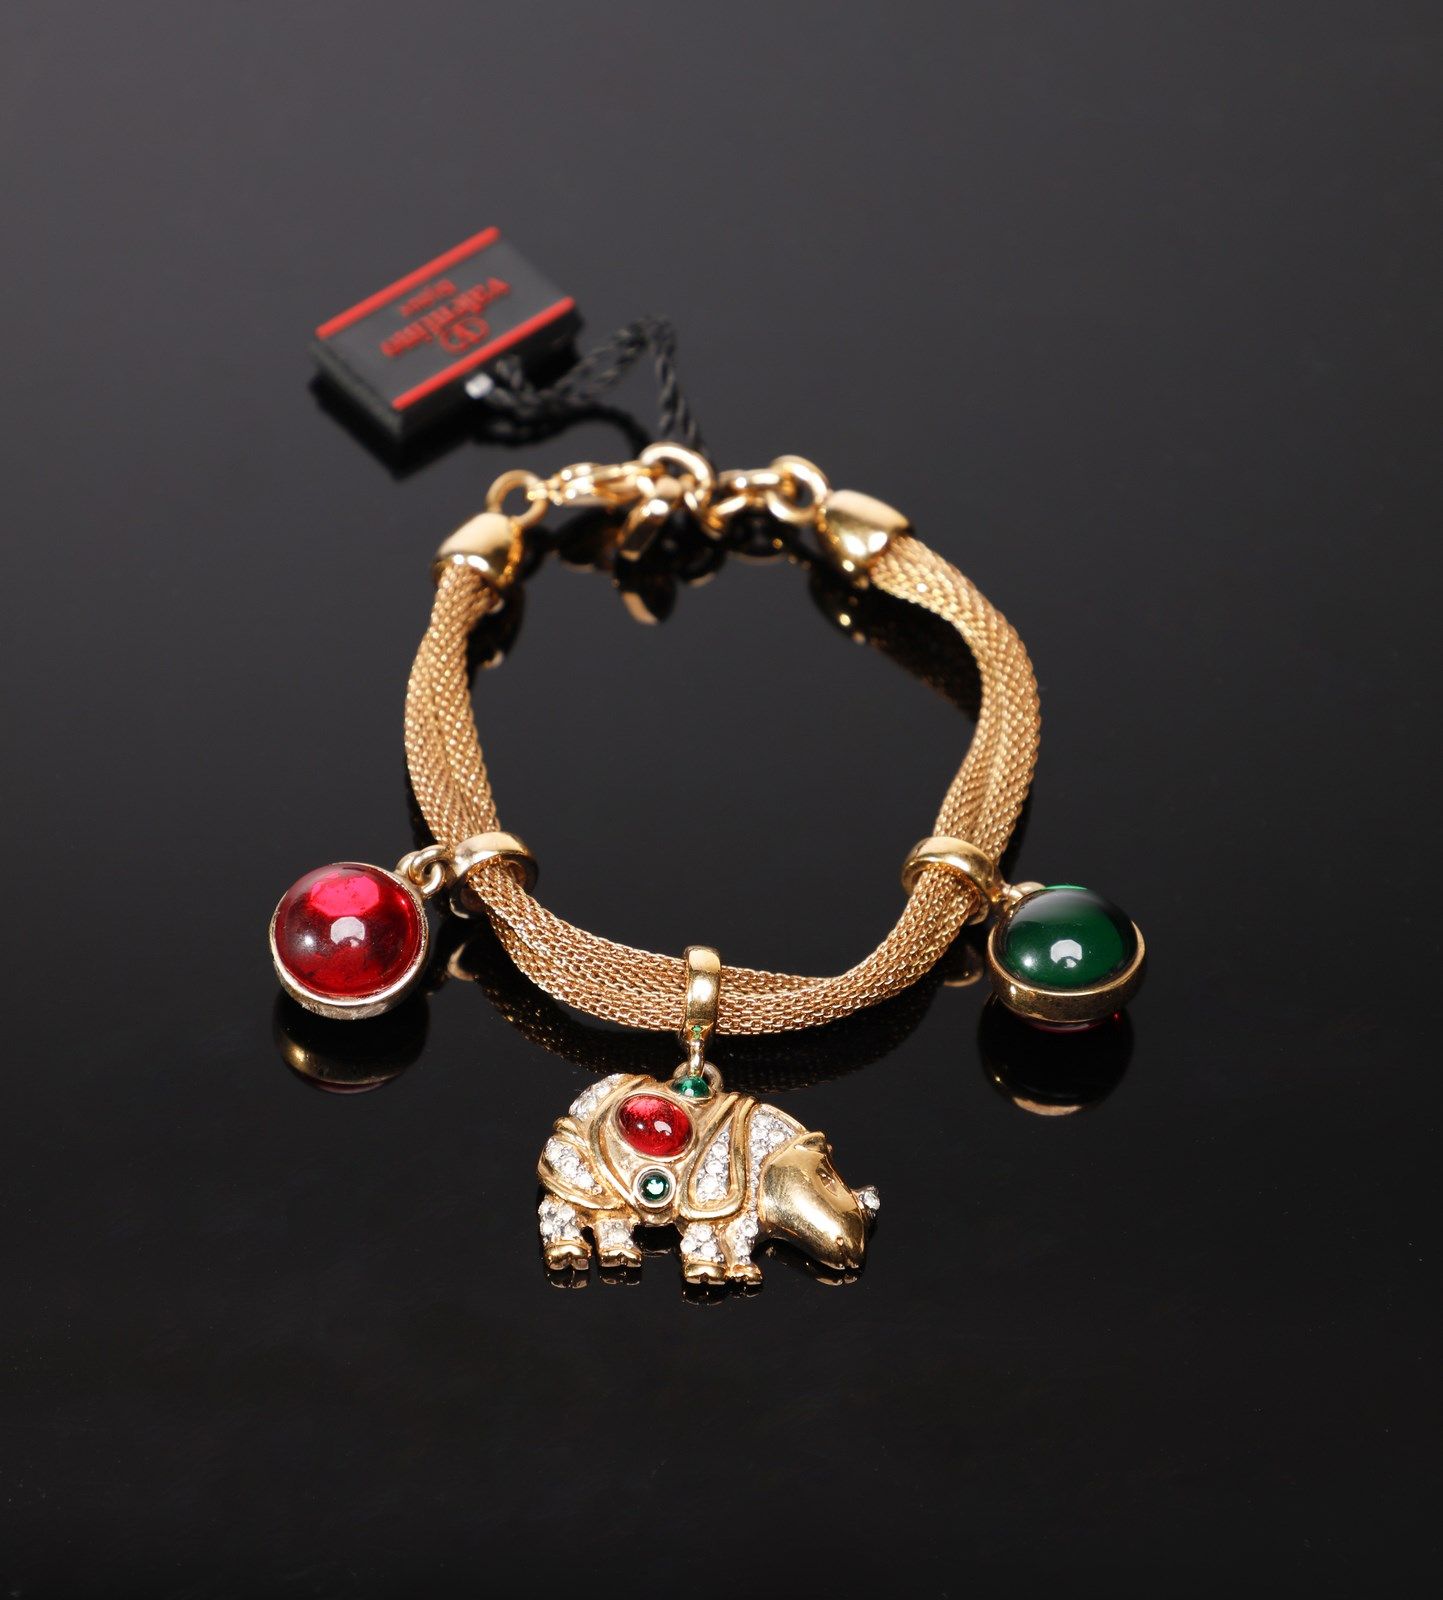 VALENTINO Charms bacelet. Charms-Armband. Lackiertes Metall und Chrom. .